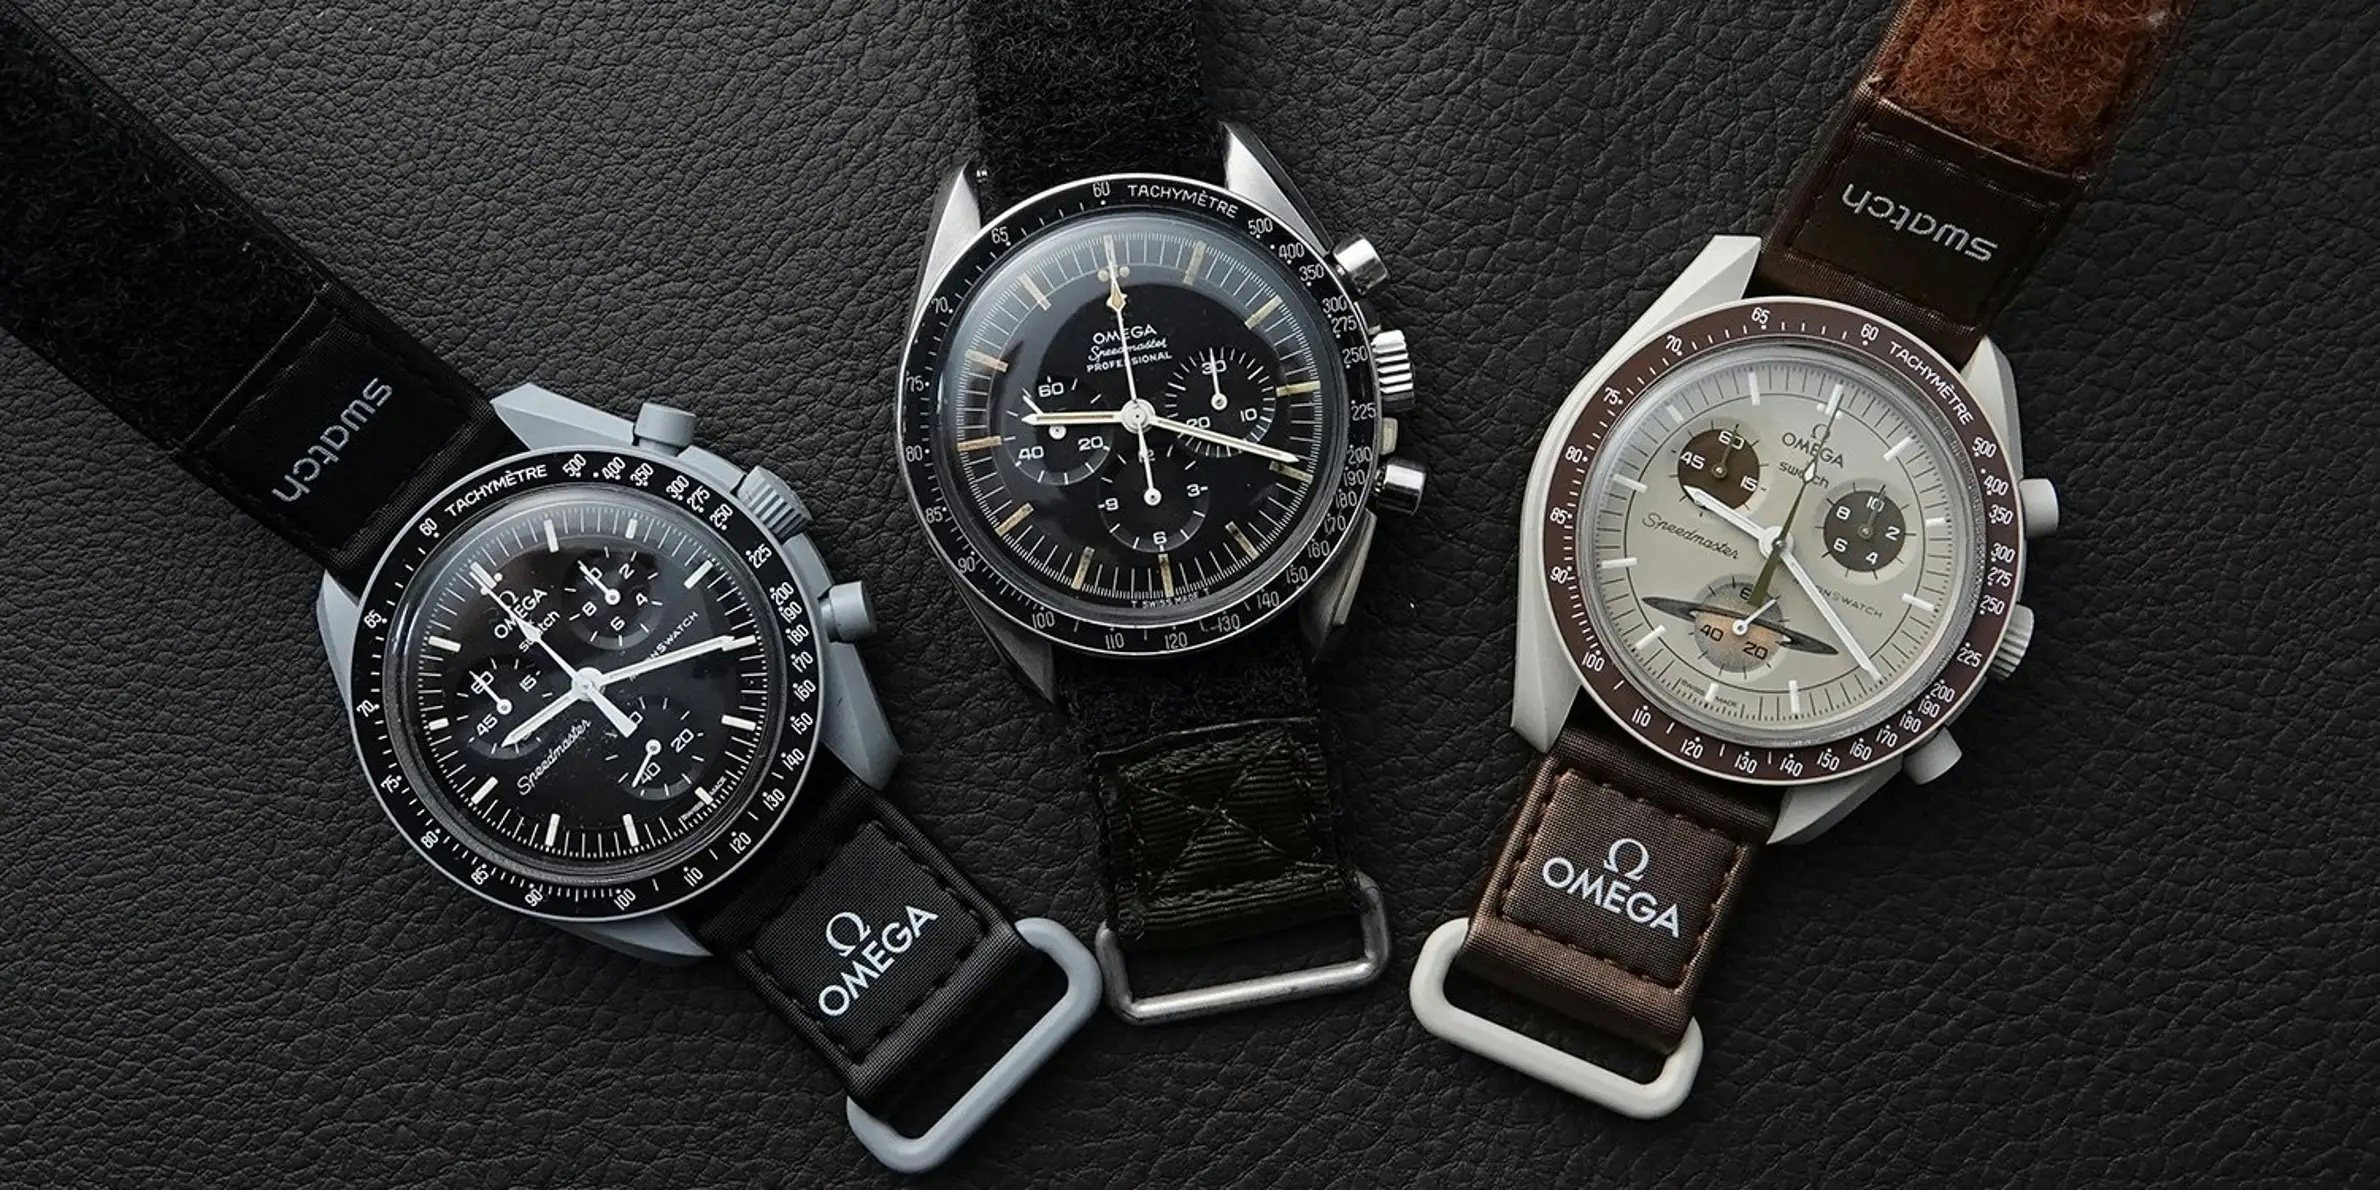 On Xiaohongshu, 7,900 posts mentioned “Planet Watch” (星球表), mainly referring to the Omega x Swatch collaborative wristwatch collection. Image: Swatch